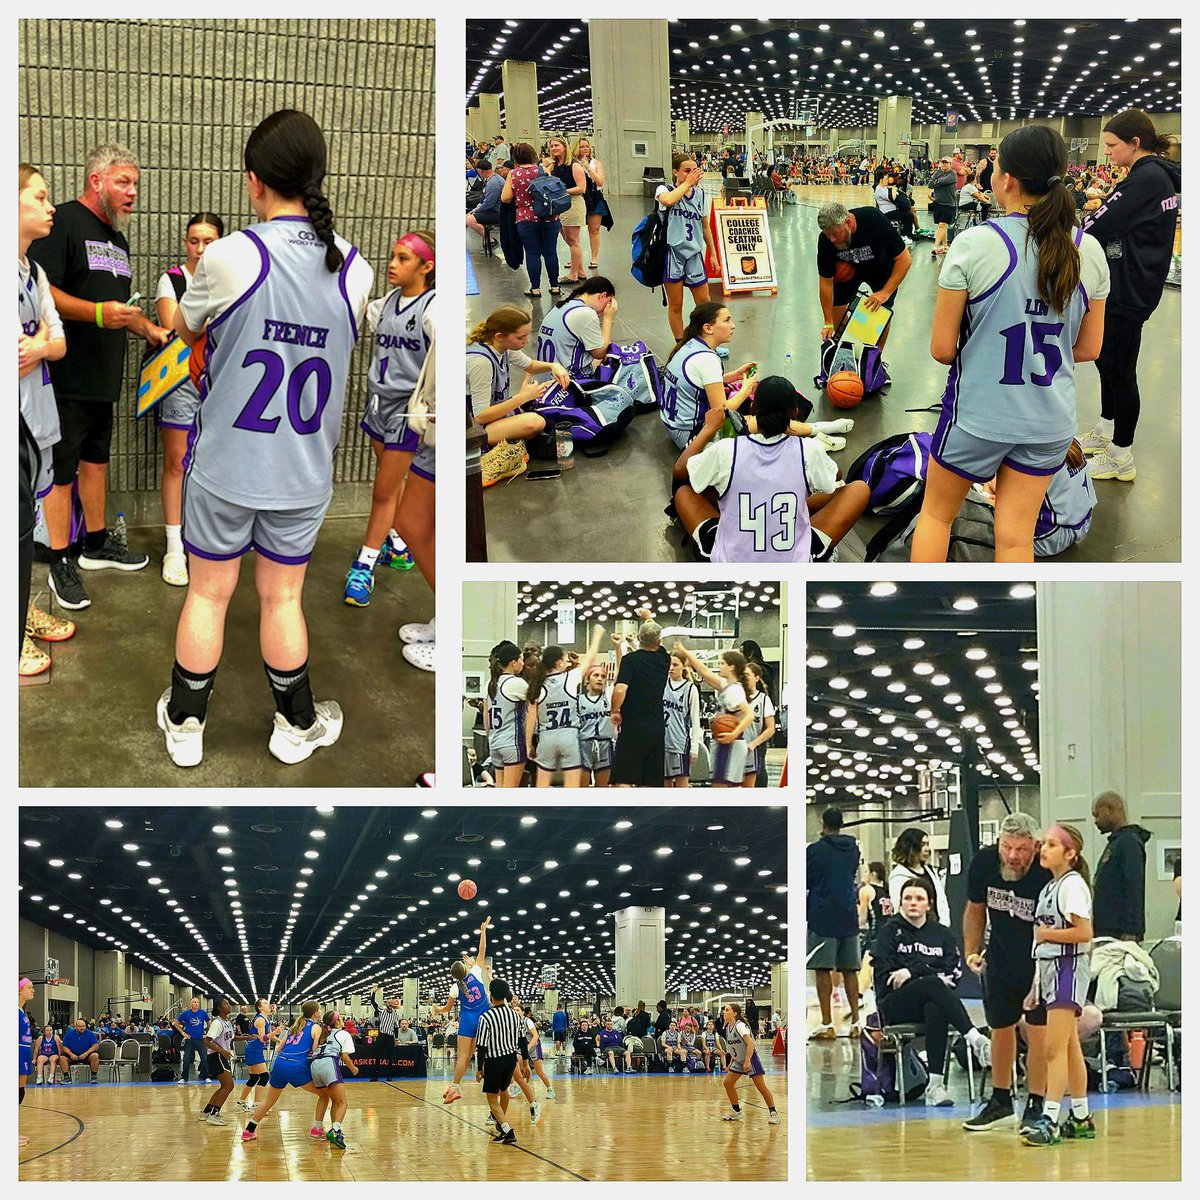 🏀 Day 2 & 3 @SelectEventsBB 
Classic Louisville Ky,,, Lots of Growth this wkend !! @LouLadyTrojans @alyxwhite_ @riseupsports1 #alwaysworking 
@courierjournal #futureisbright
@kyaaubasketball